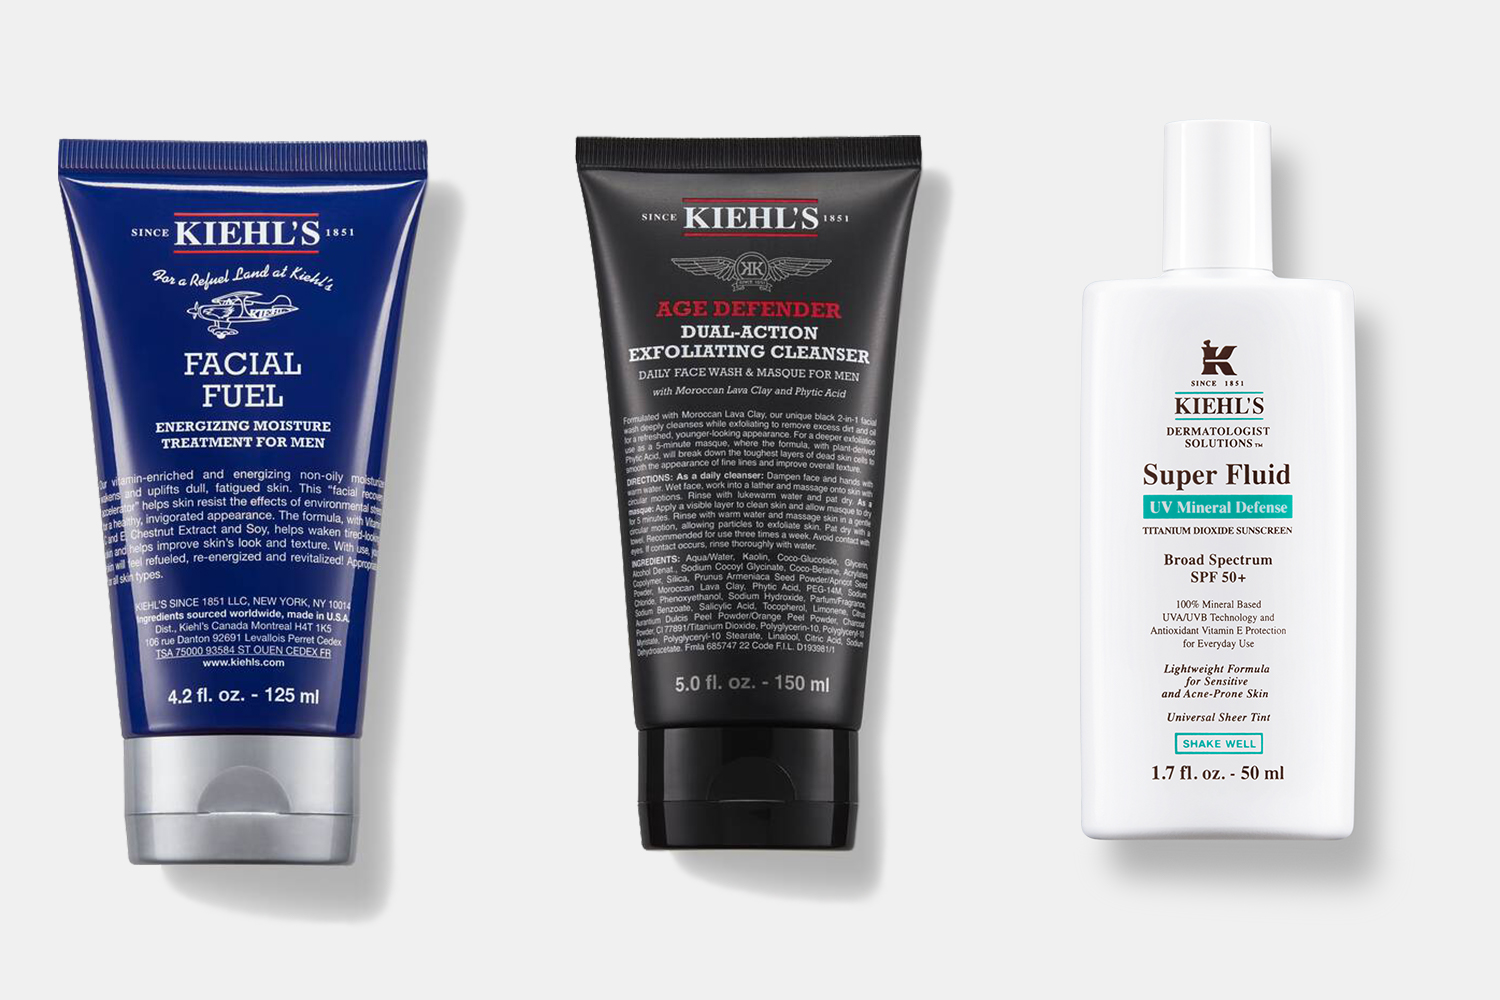 Kiehl's moisturizer, cleanse, face masks and sunscreen